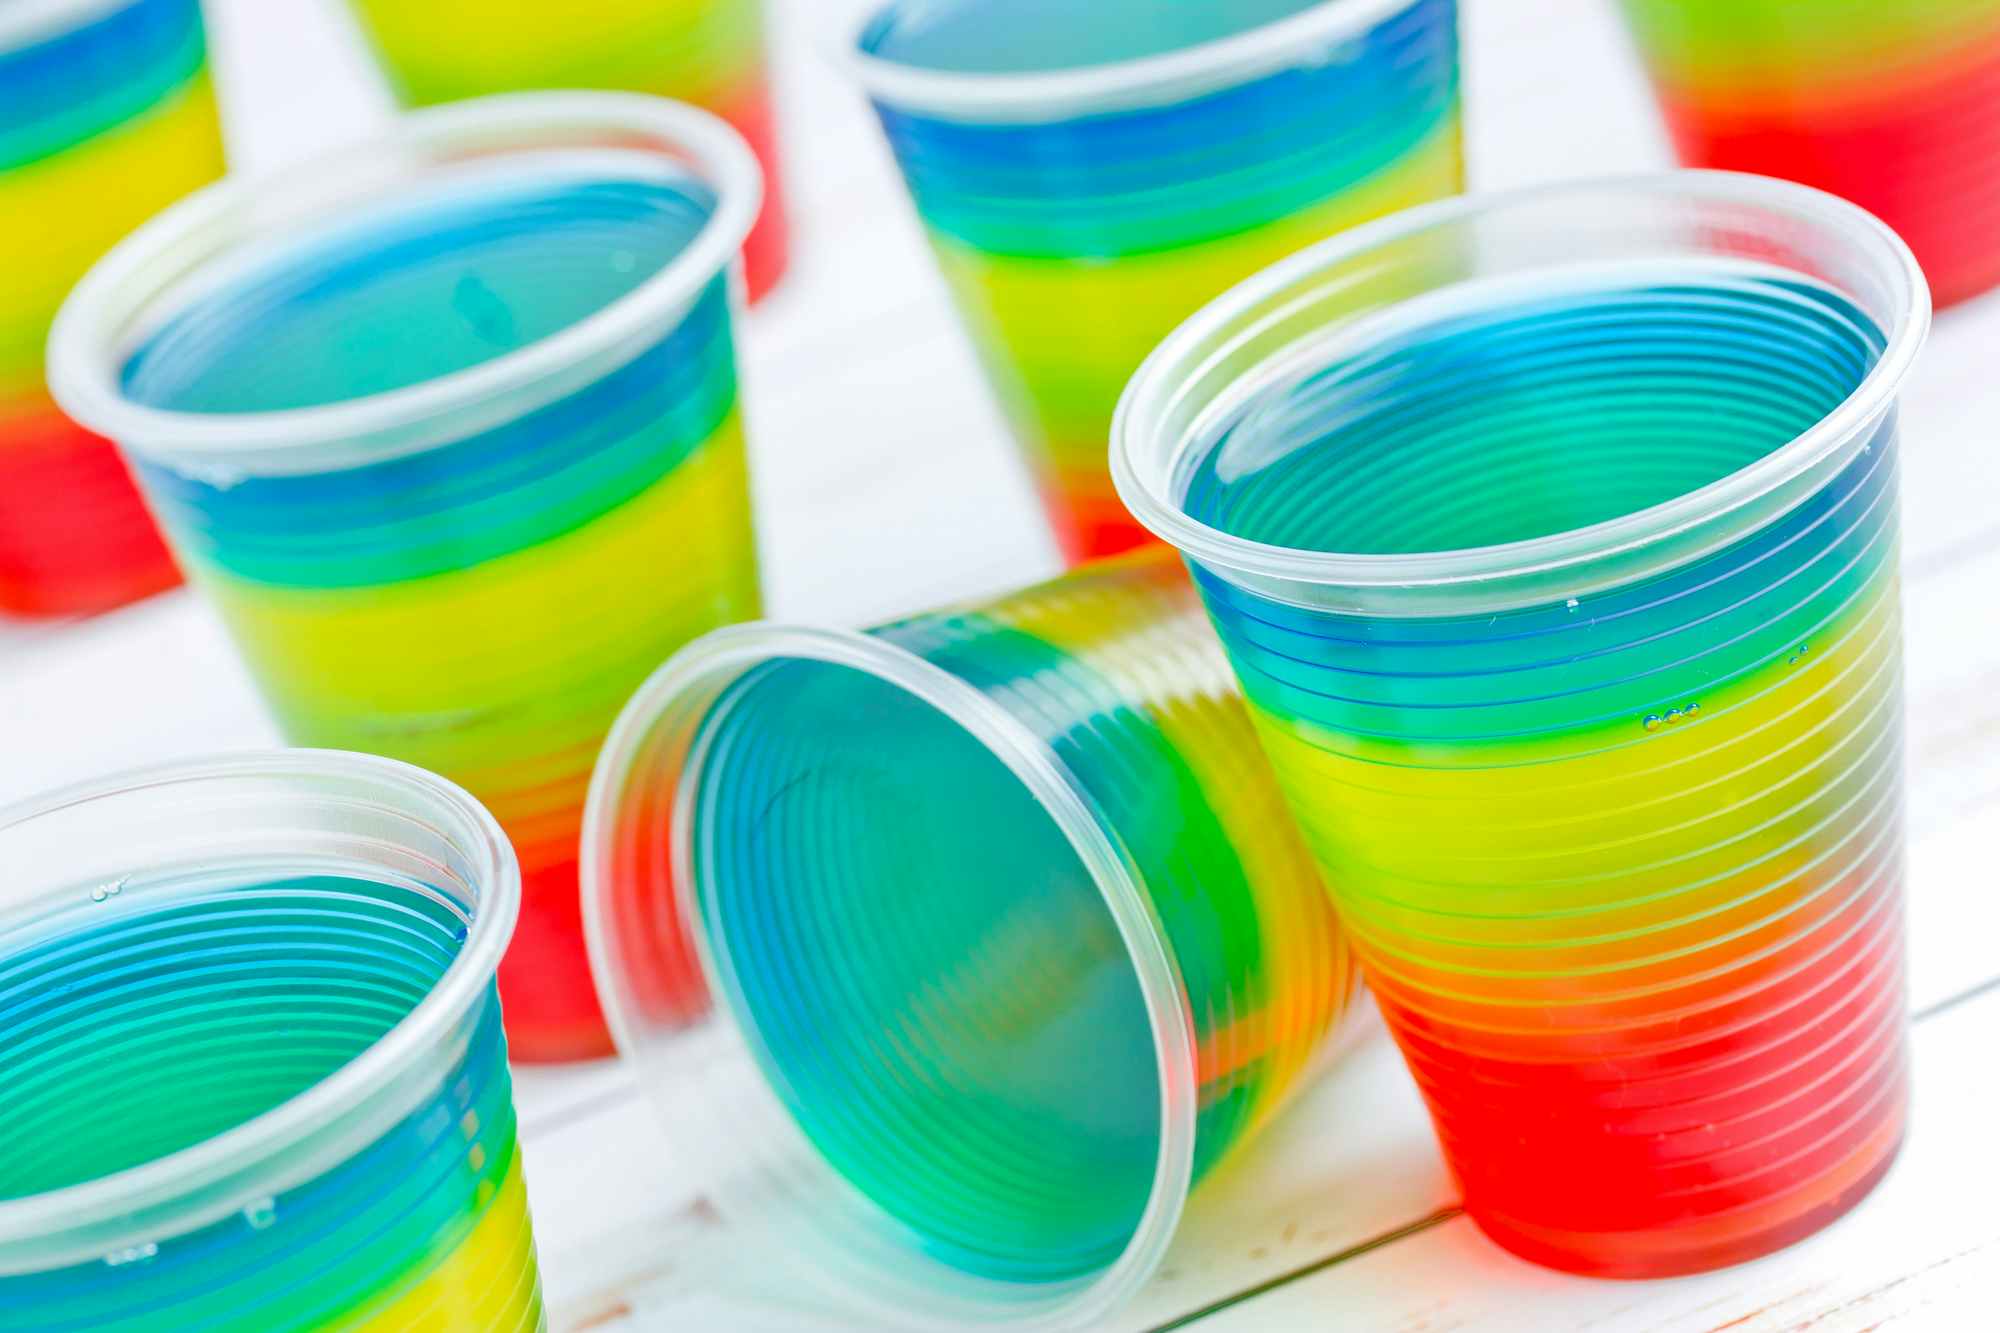 Cups with a rainbow of colorful Jell-O in them